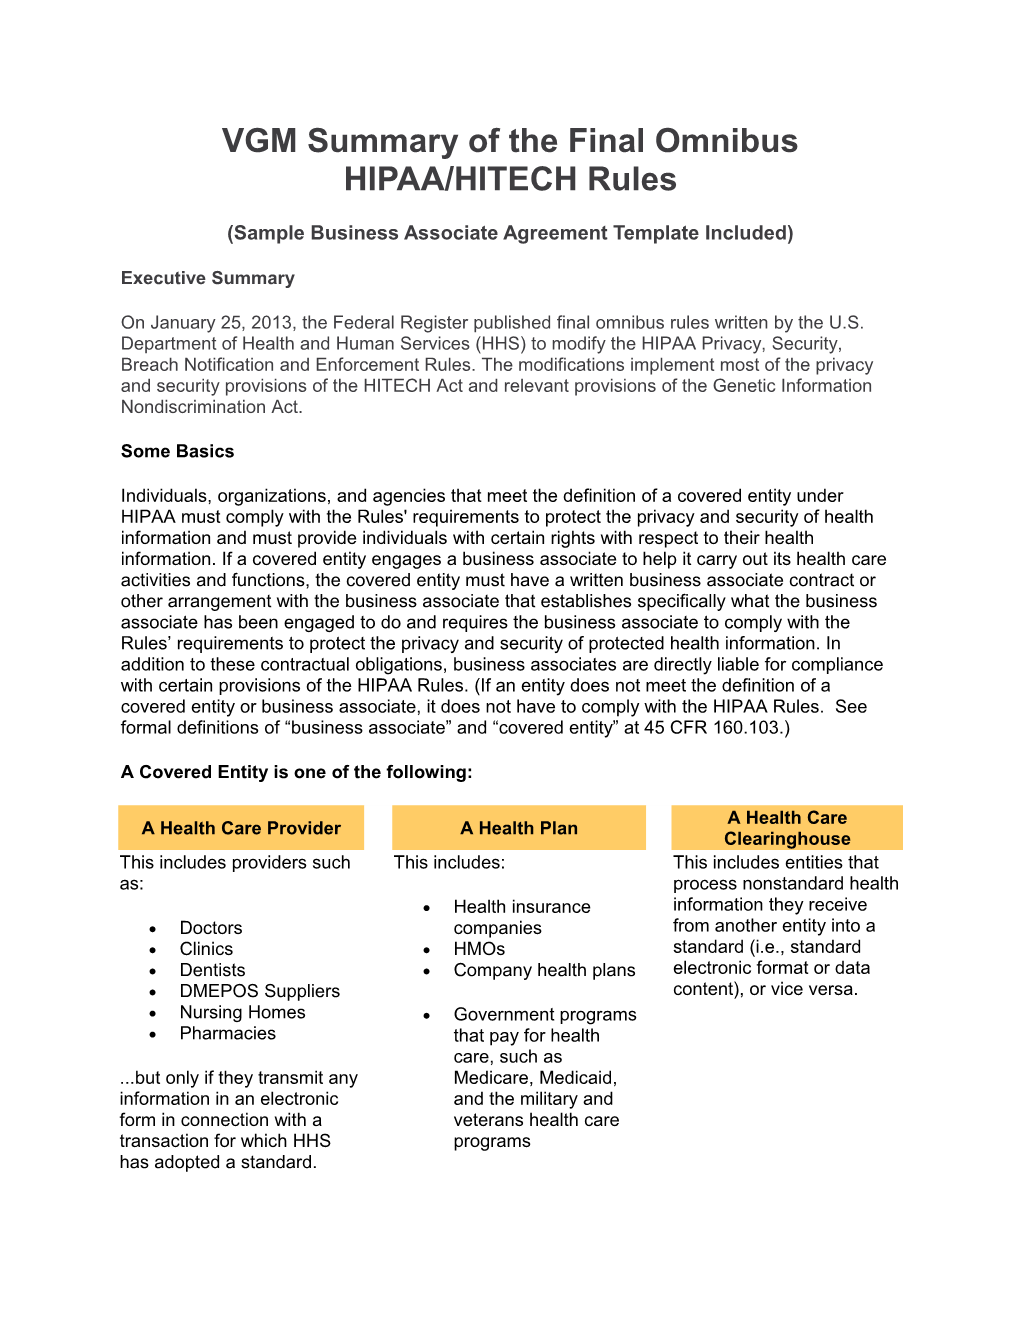 VGM Summary of the Final Omnibus HIPAA/HITECH Rules